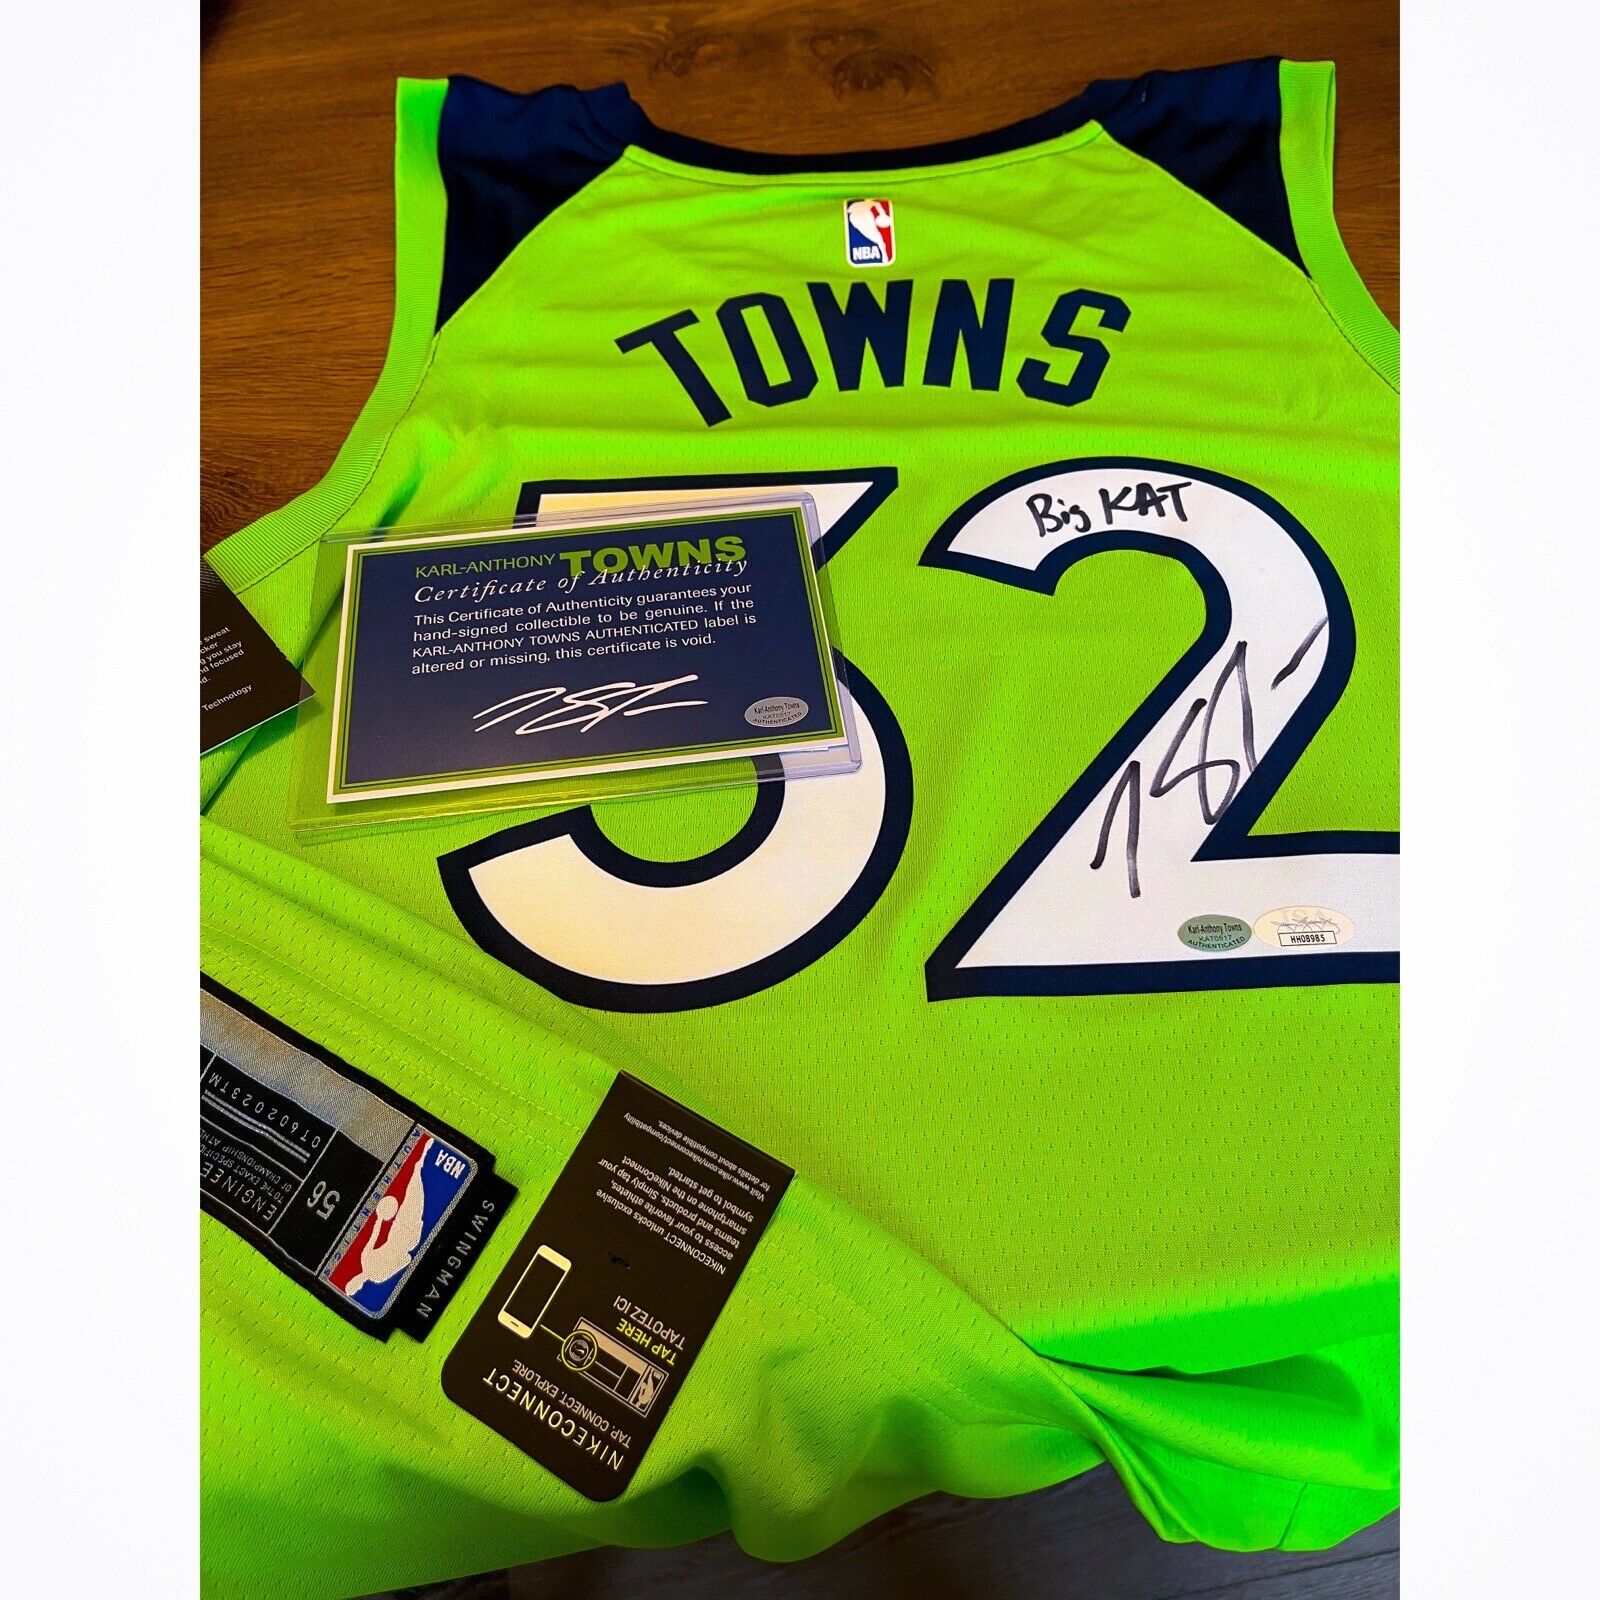 Karl-Anthony Towns Signed Minnesota Timberwolves Jersey (Towns COA